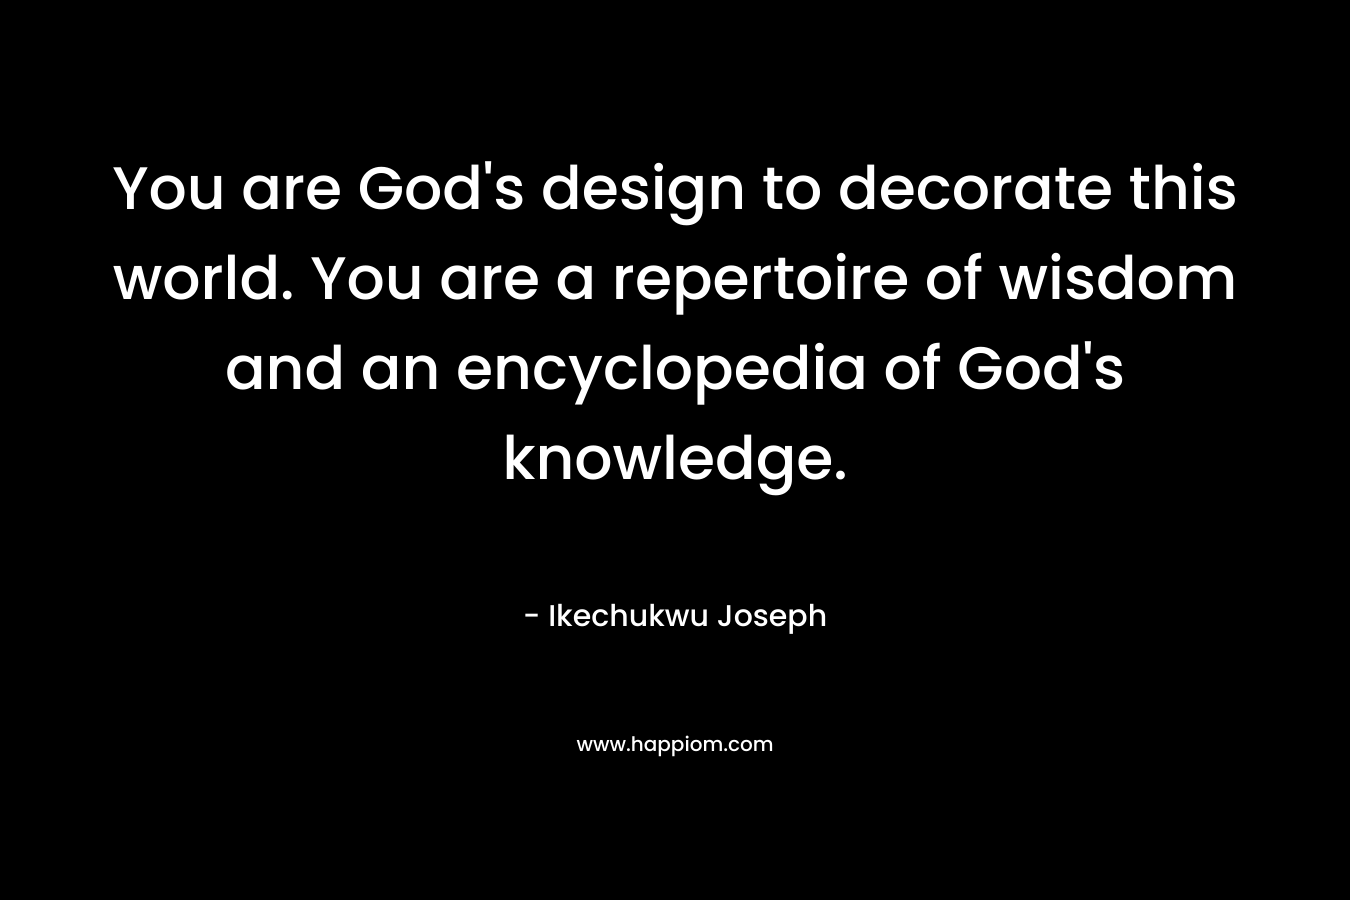 You are God’s design to decorate this world. You are a repertoire of wisdom and an encyclopedia of God’s knowledge. – Ikechukwu Joseph